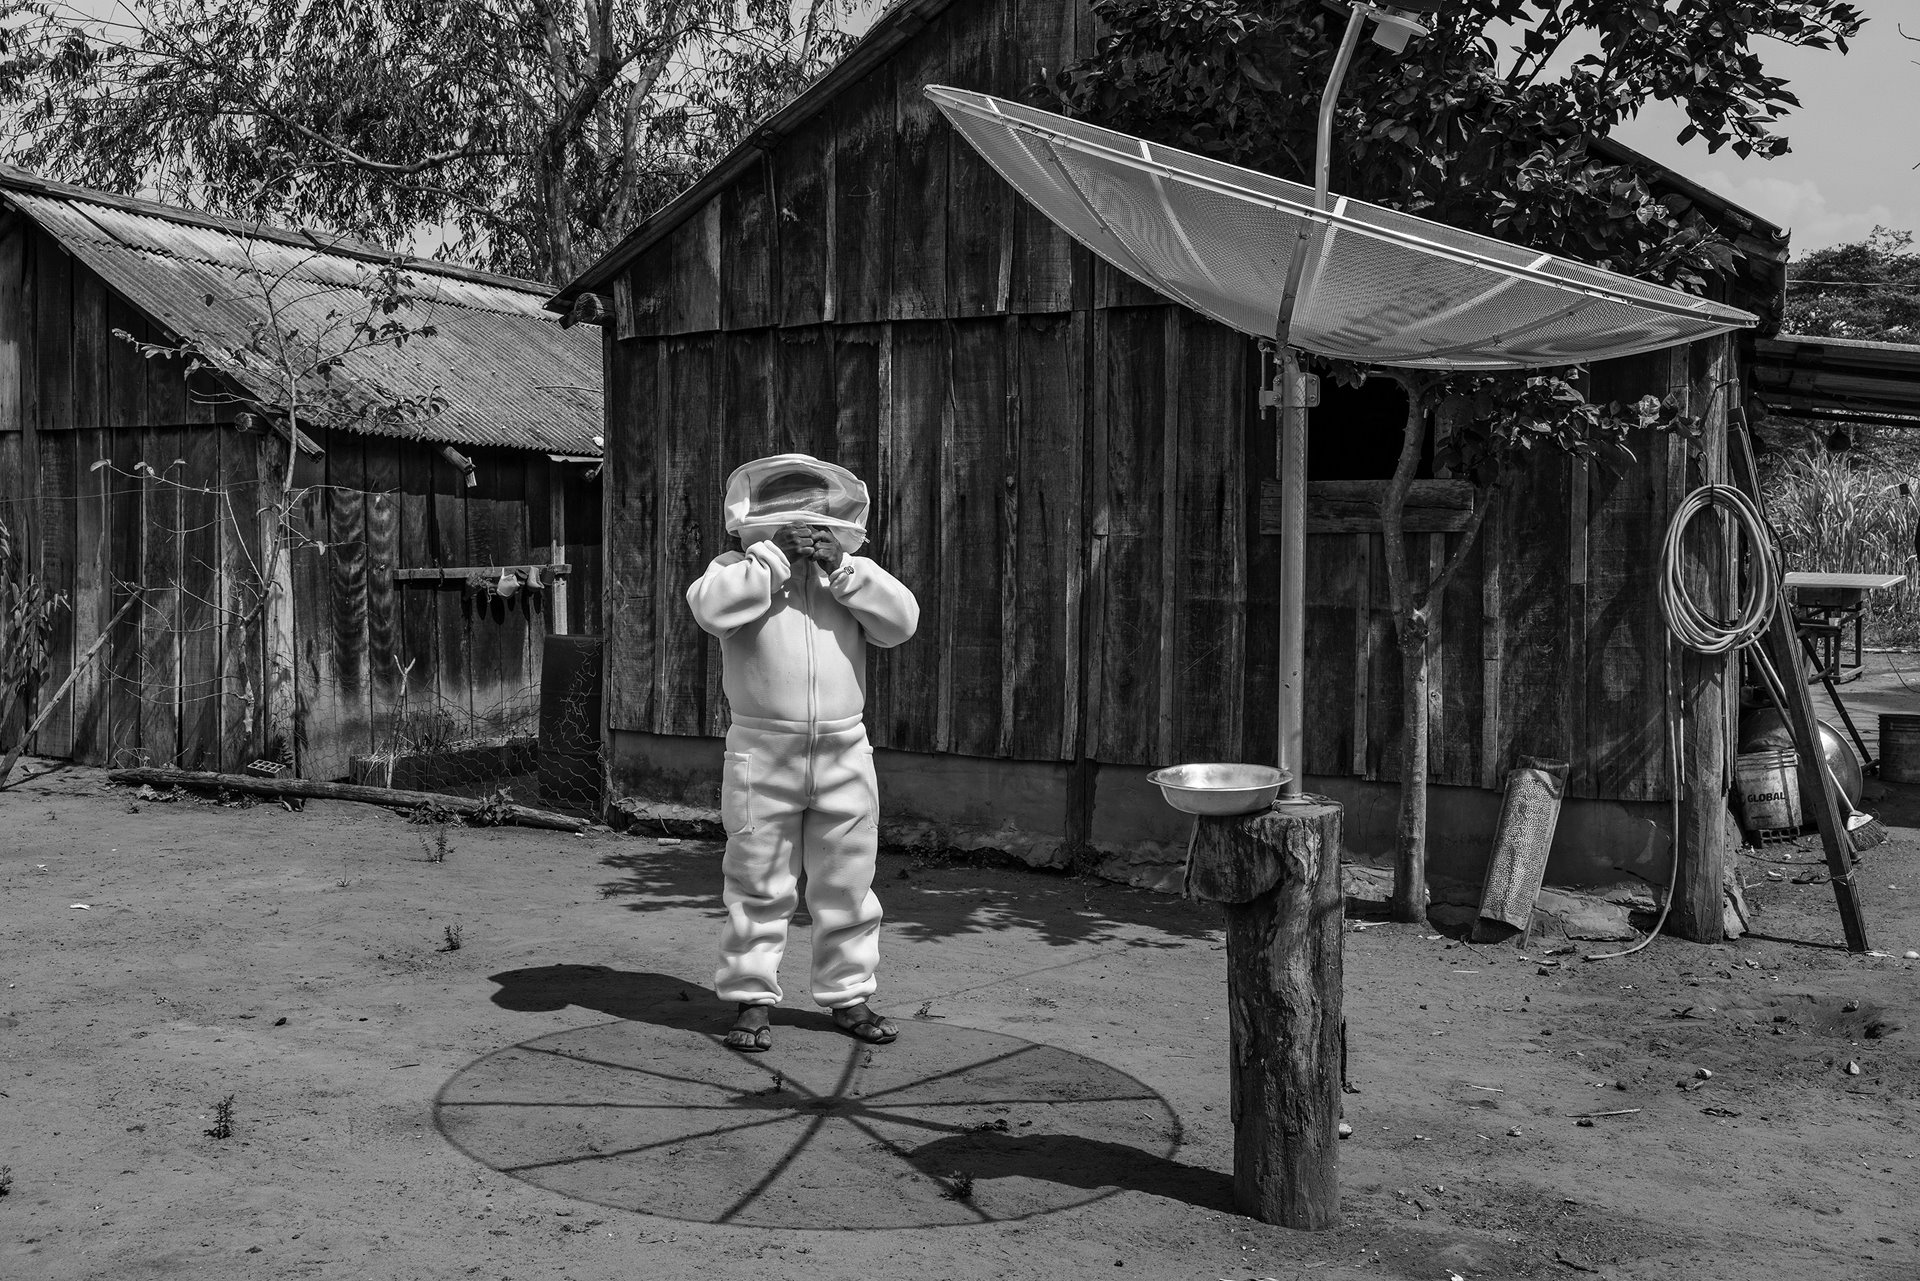 Paulo Marcos Tupxi, removes his beekeeper&#39;s outfit after collecting honey from his apiary in the Irántxe Indigenous Land, in Mato Grosso, in the Brazilian Amazon. Many members of his Manoki community have turned from traditional subsistence practices to planting soybeans.